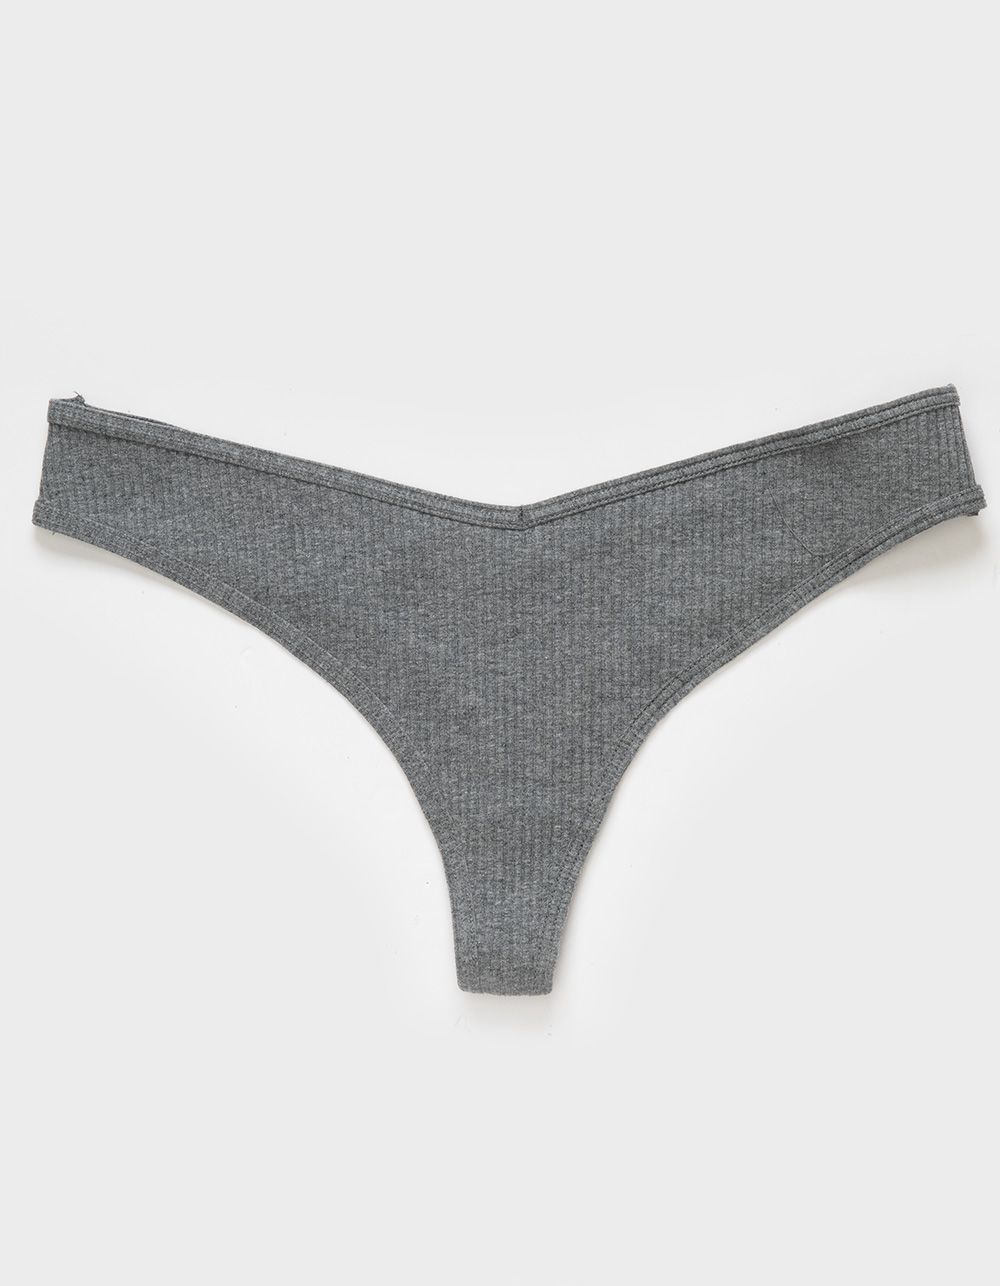 Over 20 Pairs Of New or Gently Used Panties for Sale in Winston